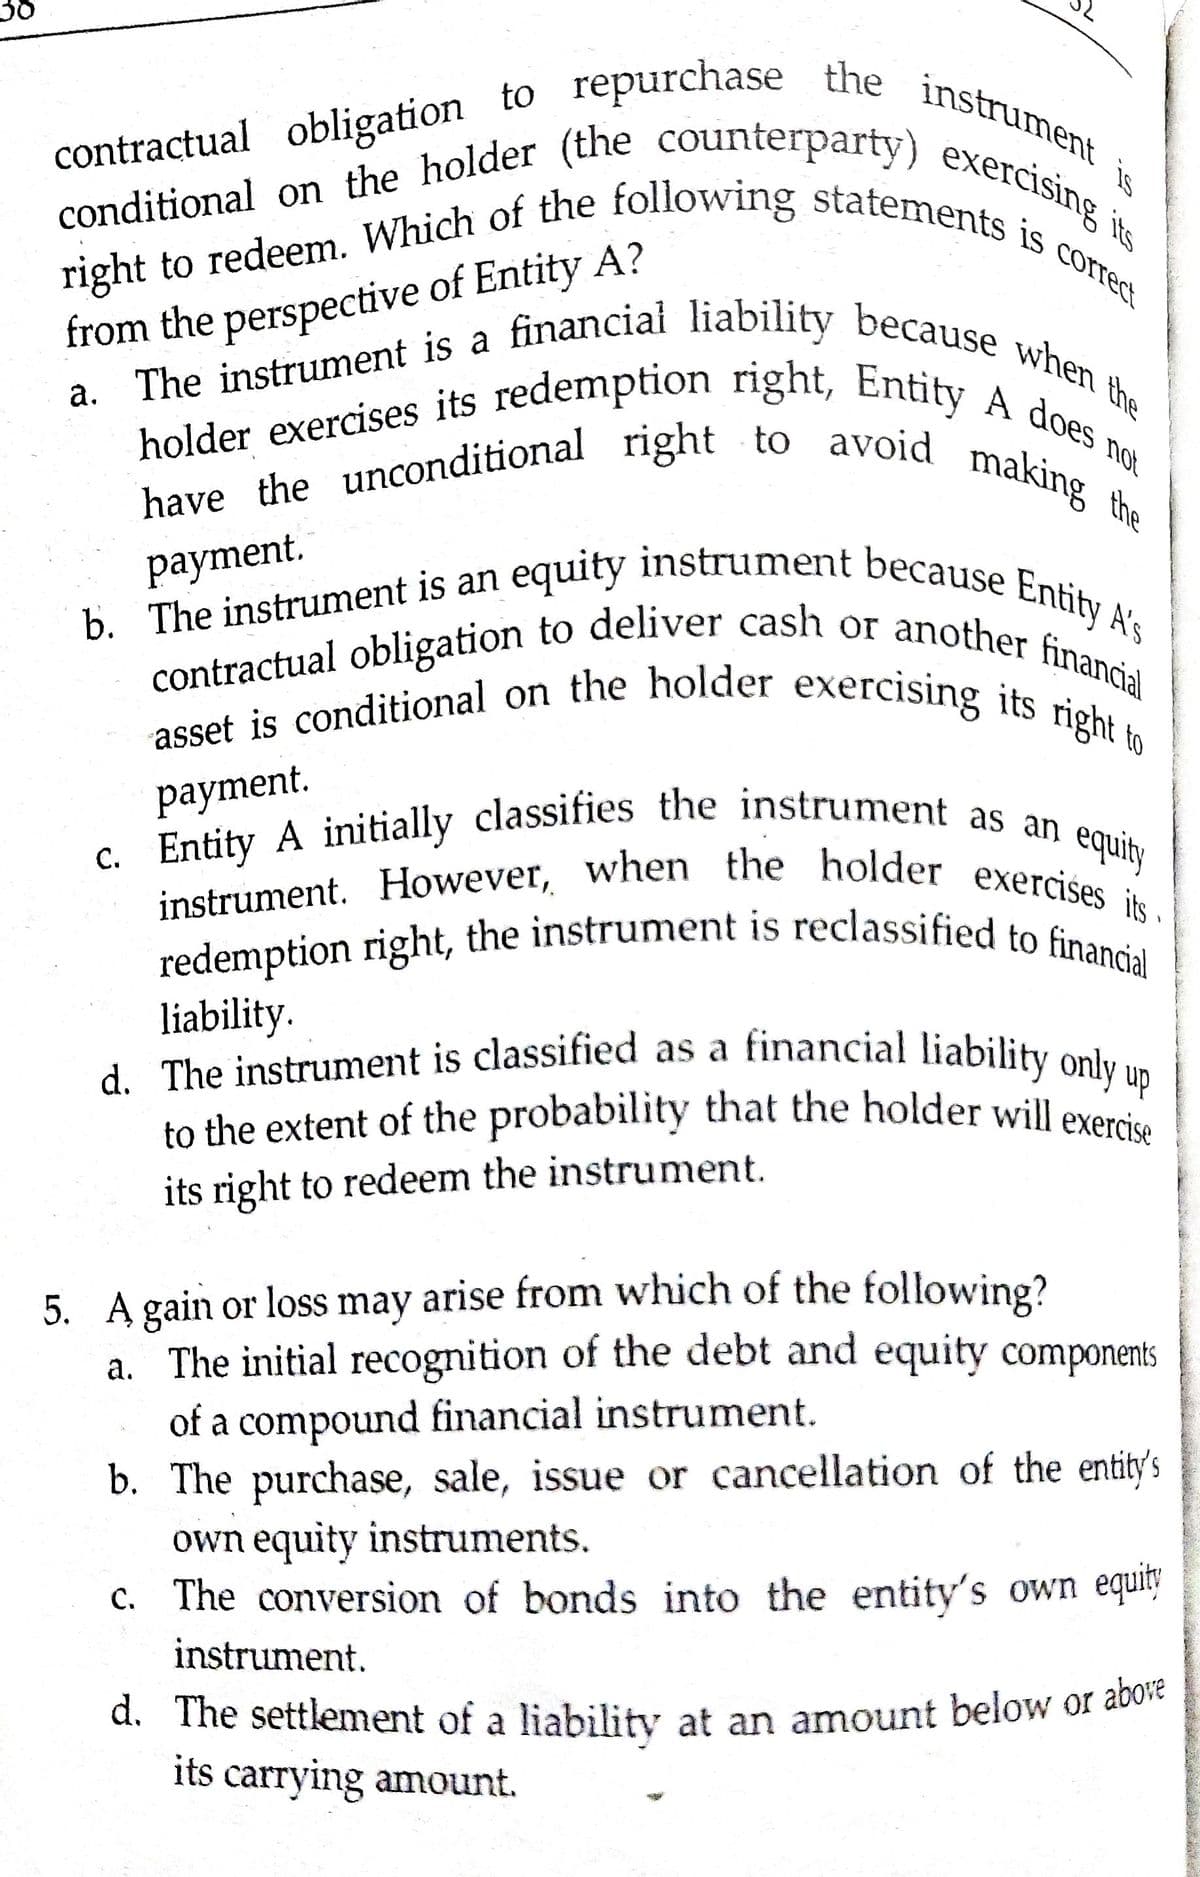 right to redeem. Which of the following statements is correct
c. Entity A initially classifies the instrument as an
d. The settlement of a liability at an amount below or above
holder exercises its redemption right, Entity A does not
conditional on the holder (the counterparty) exercising its
to the extent of the probability that the holder will exercise
contractual obligation to repurchase the instrument
redemption right, the instrument is reclassified to financial
instrument. However, when the holder exercises its
asset is conditional on the holder exercising its right to
contractual obligation to deliver cash or another financial
have the unconditional right to avoid making the
d. The instrument is classified as a financial liability only up
b. The instrument is an equity instrument because Entify A's
a. The instrument is a financiai liability because when the
contractual obligation to
is
holder exercises its redemption right, Entih. when
making
a. The instrument is a
not
the
payment.
b. The instrument is an
рayment.
C. Entity A initially classifies the instrument as
equity
redemption right, the instrument is reclassified to fi Is
liability.
d. The instrument is classified as a financial liability only.
to the extent of the probability that the holder will exers
its right to redeem the instrument.
5. A gain or loss may arise from which of the following?
a. The initial recognition of the debt and equity components
of a compound financial instrument.
b. The purchase, sale, issue or cancellation of the entity's
own equity instruments.
c. The conversion of bonds into the entity's own equity
instrument.
d. The settlement of a liability at an amount below or abo
its carrying amount.
